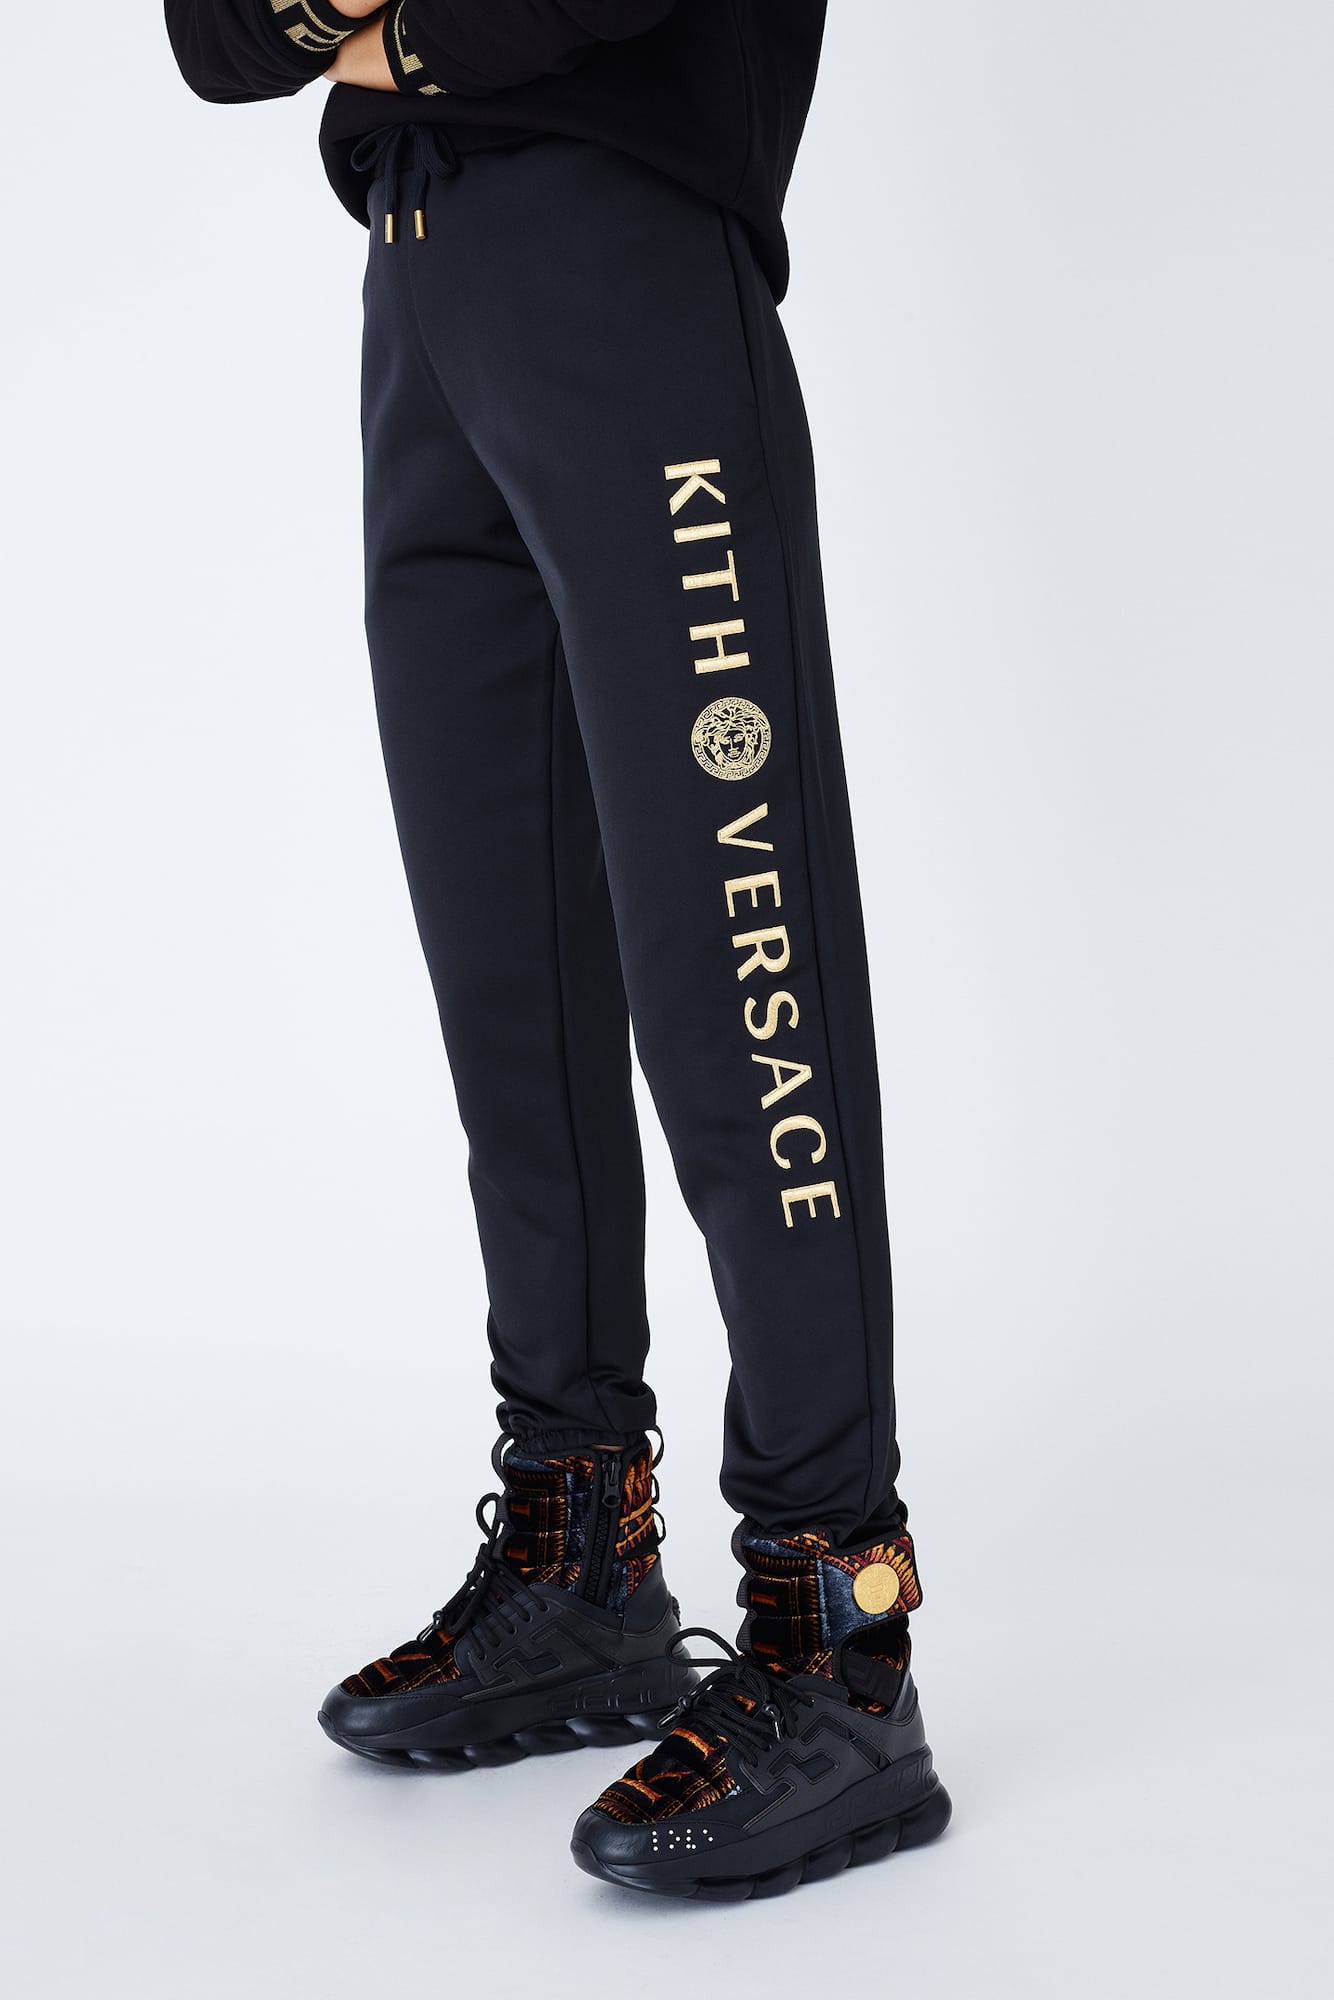 kith versace shoes